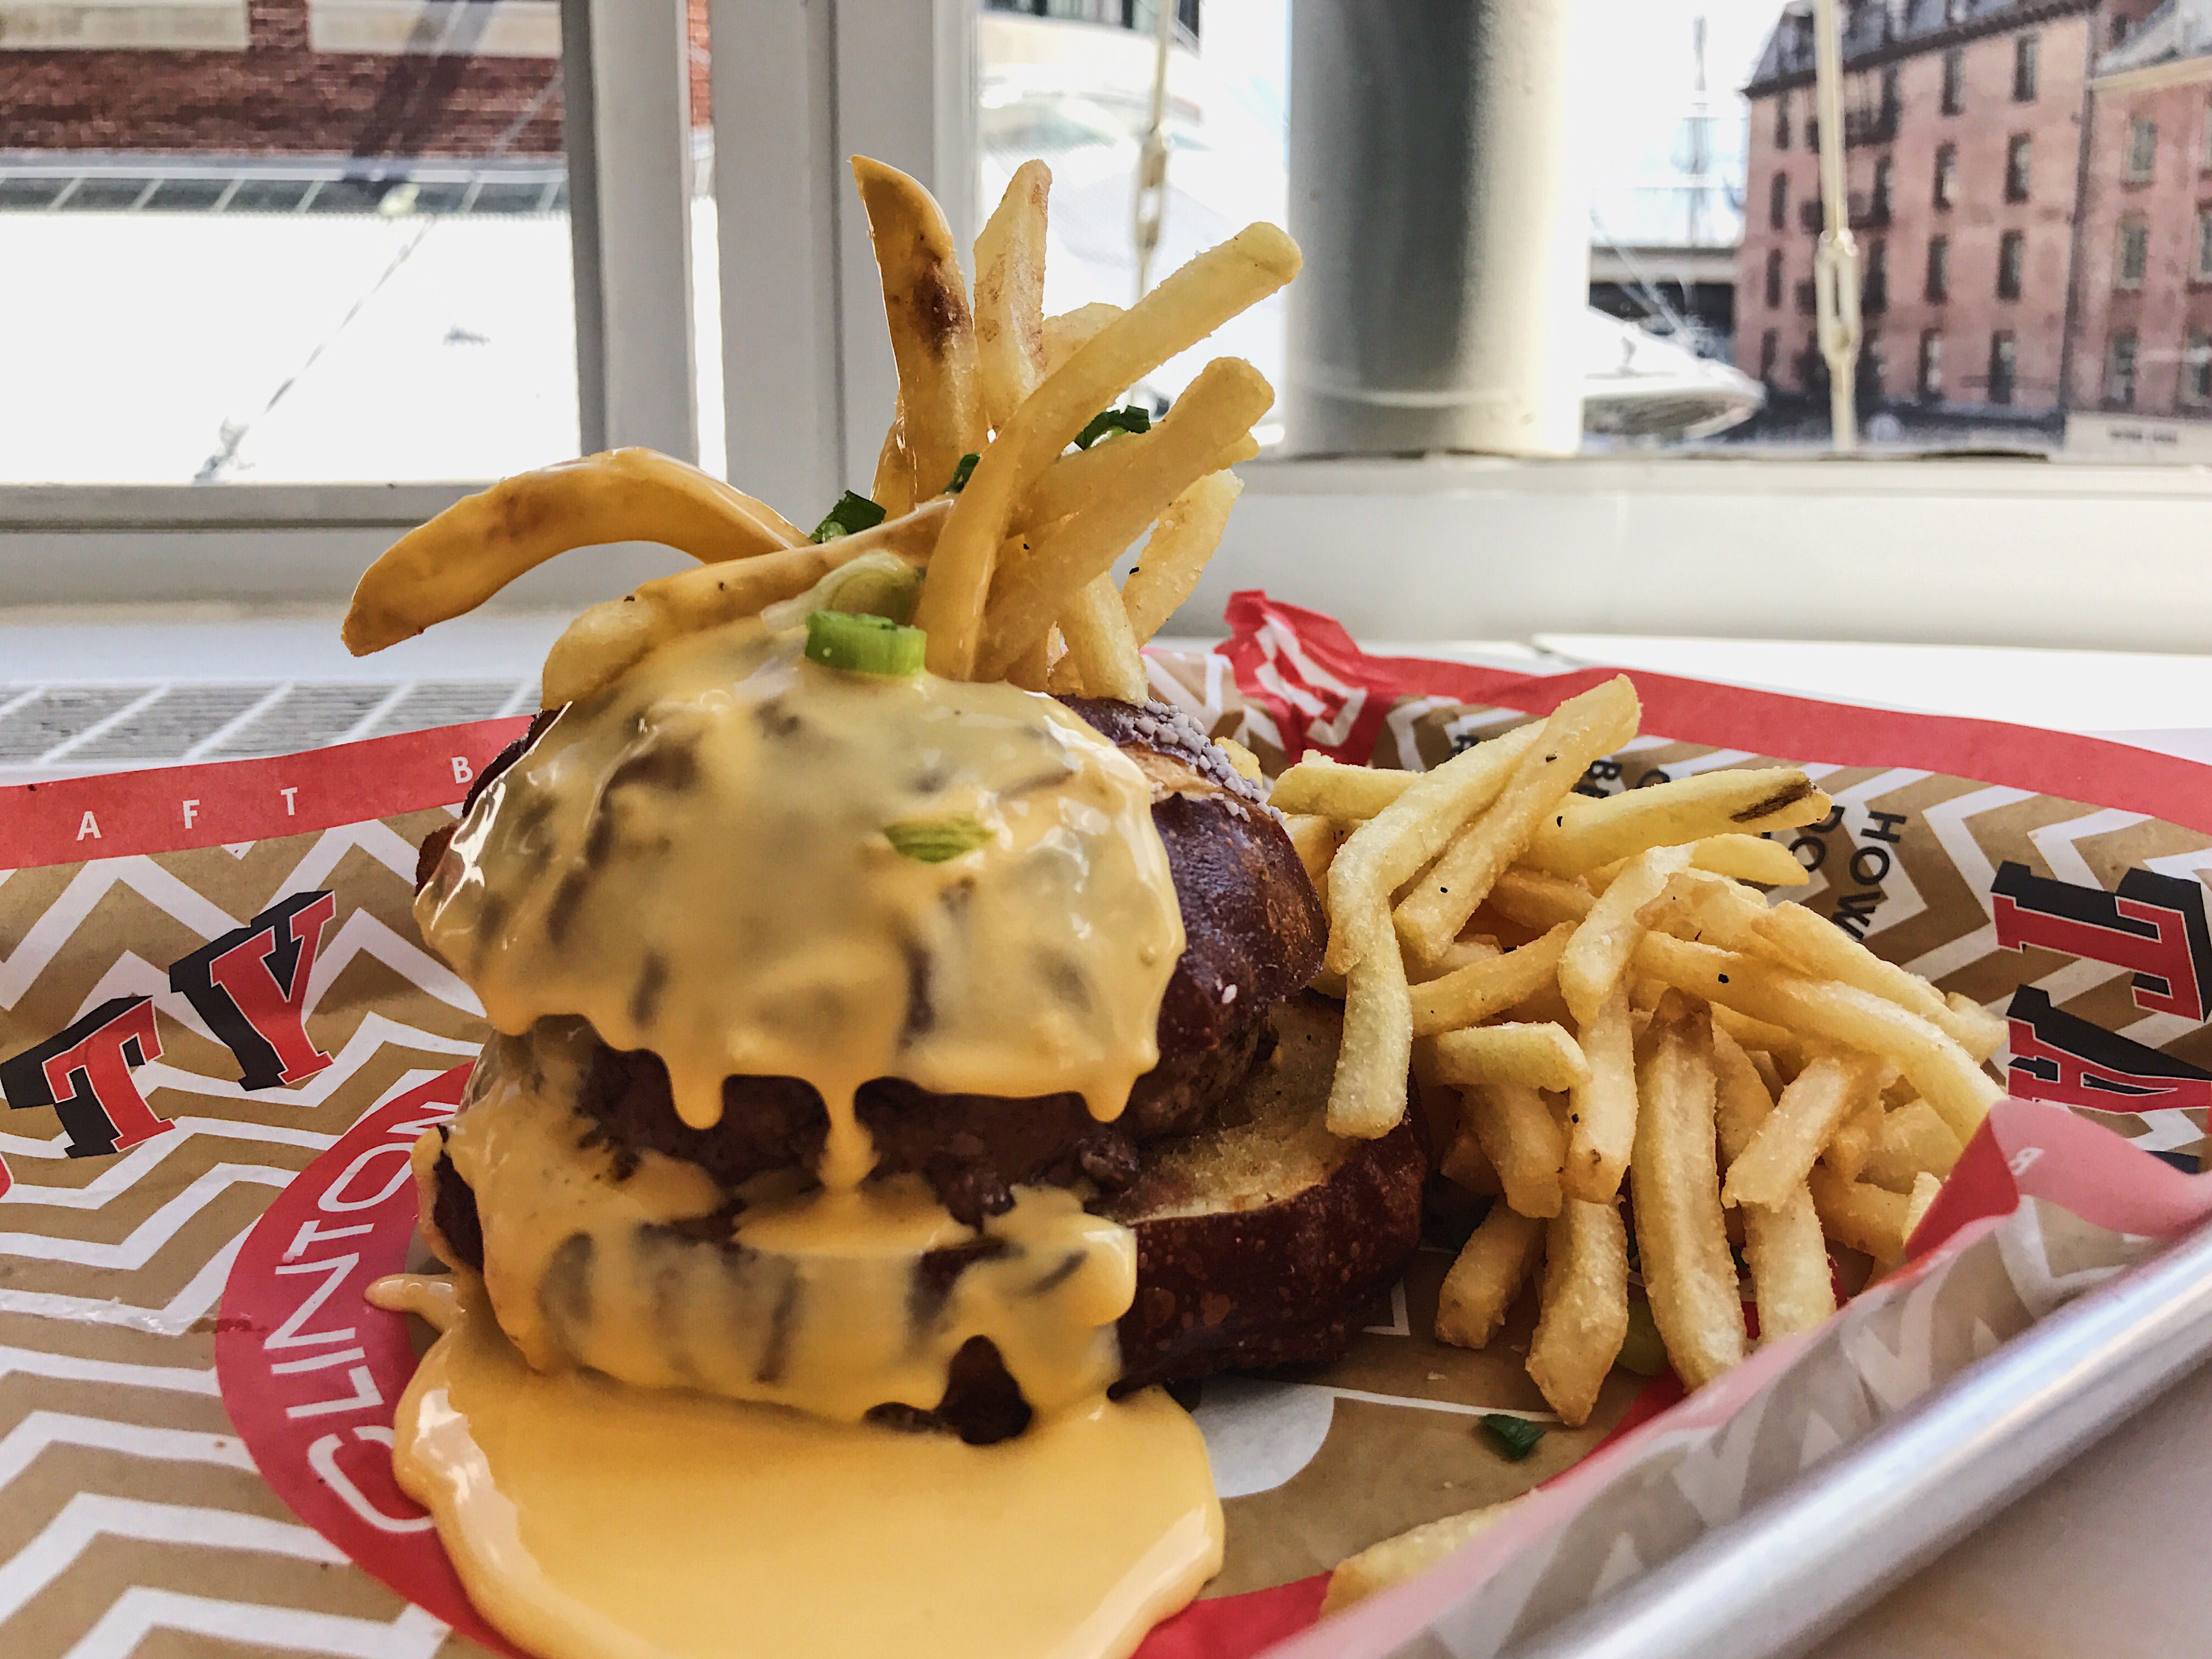 This Insane Burger Is Oozing With Cheese and Fries